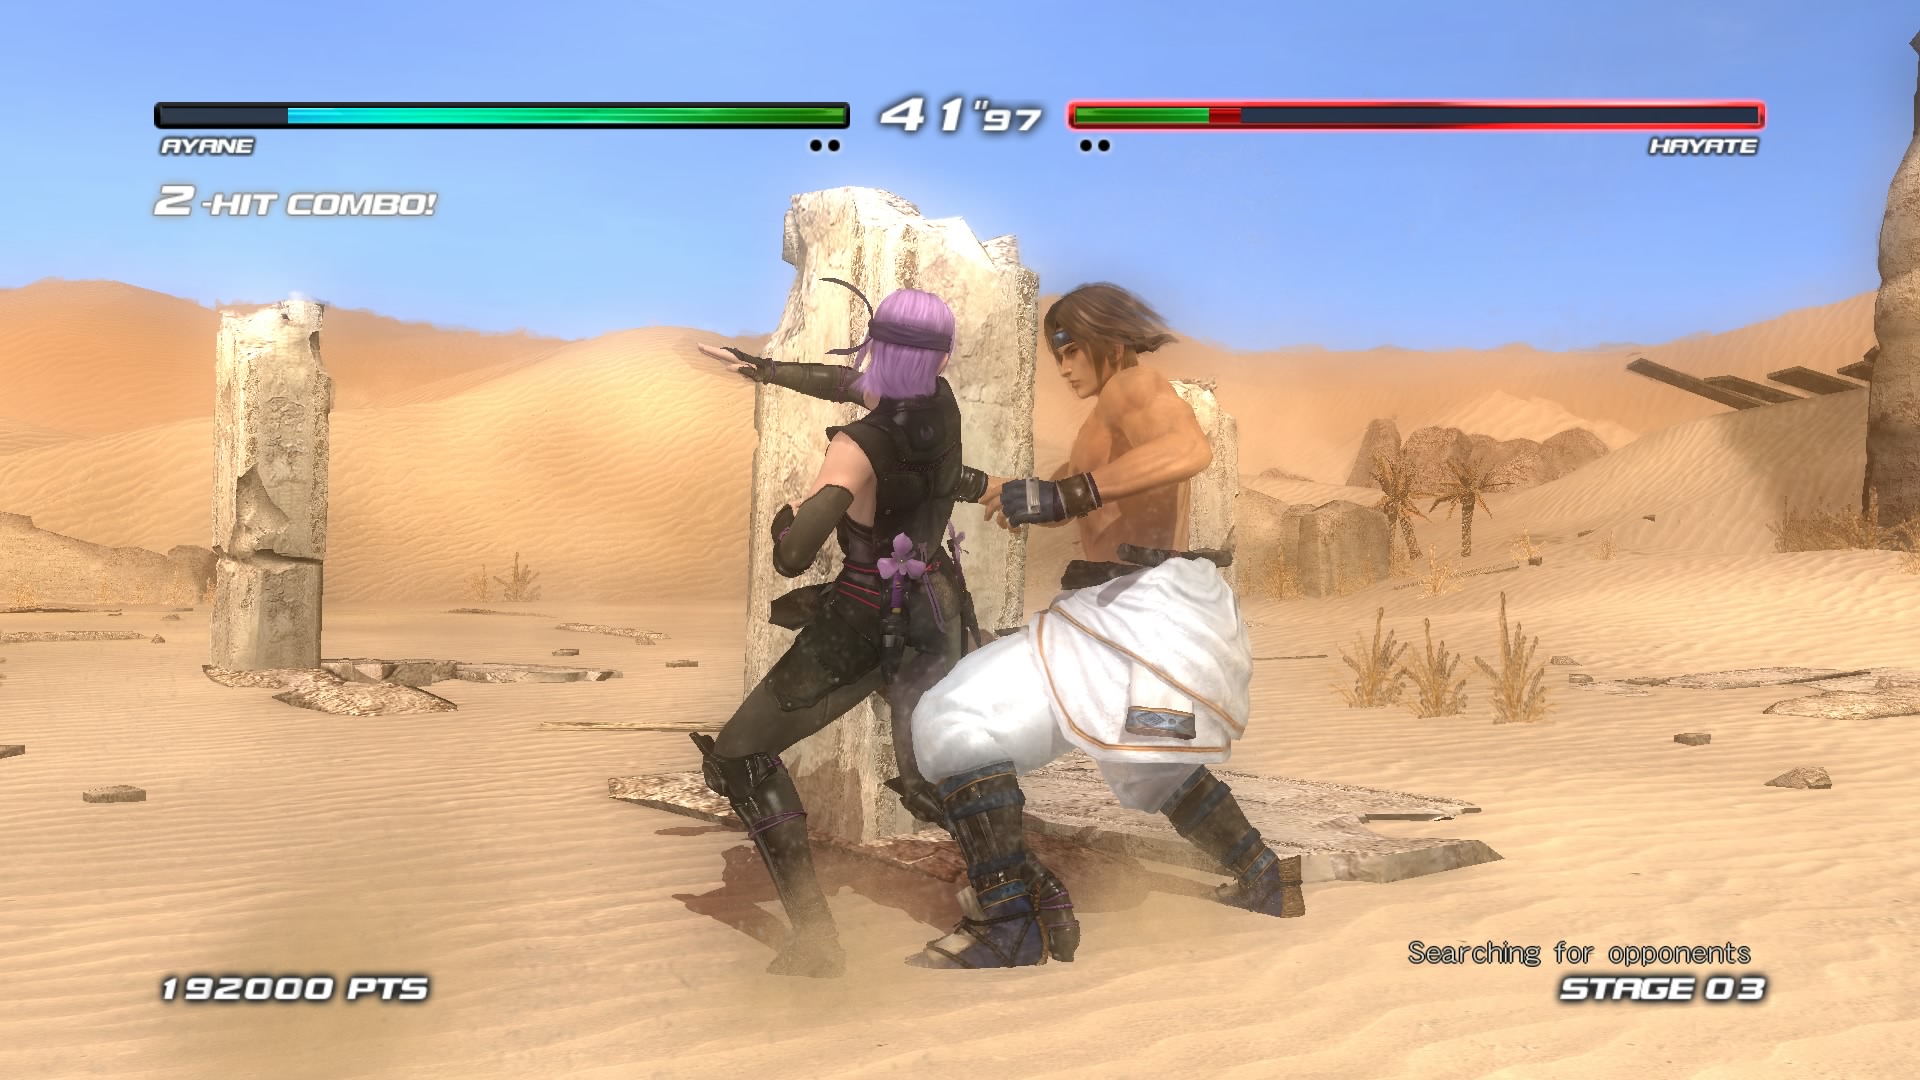 download dead or alive 5 last round ps3 for free